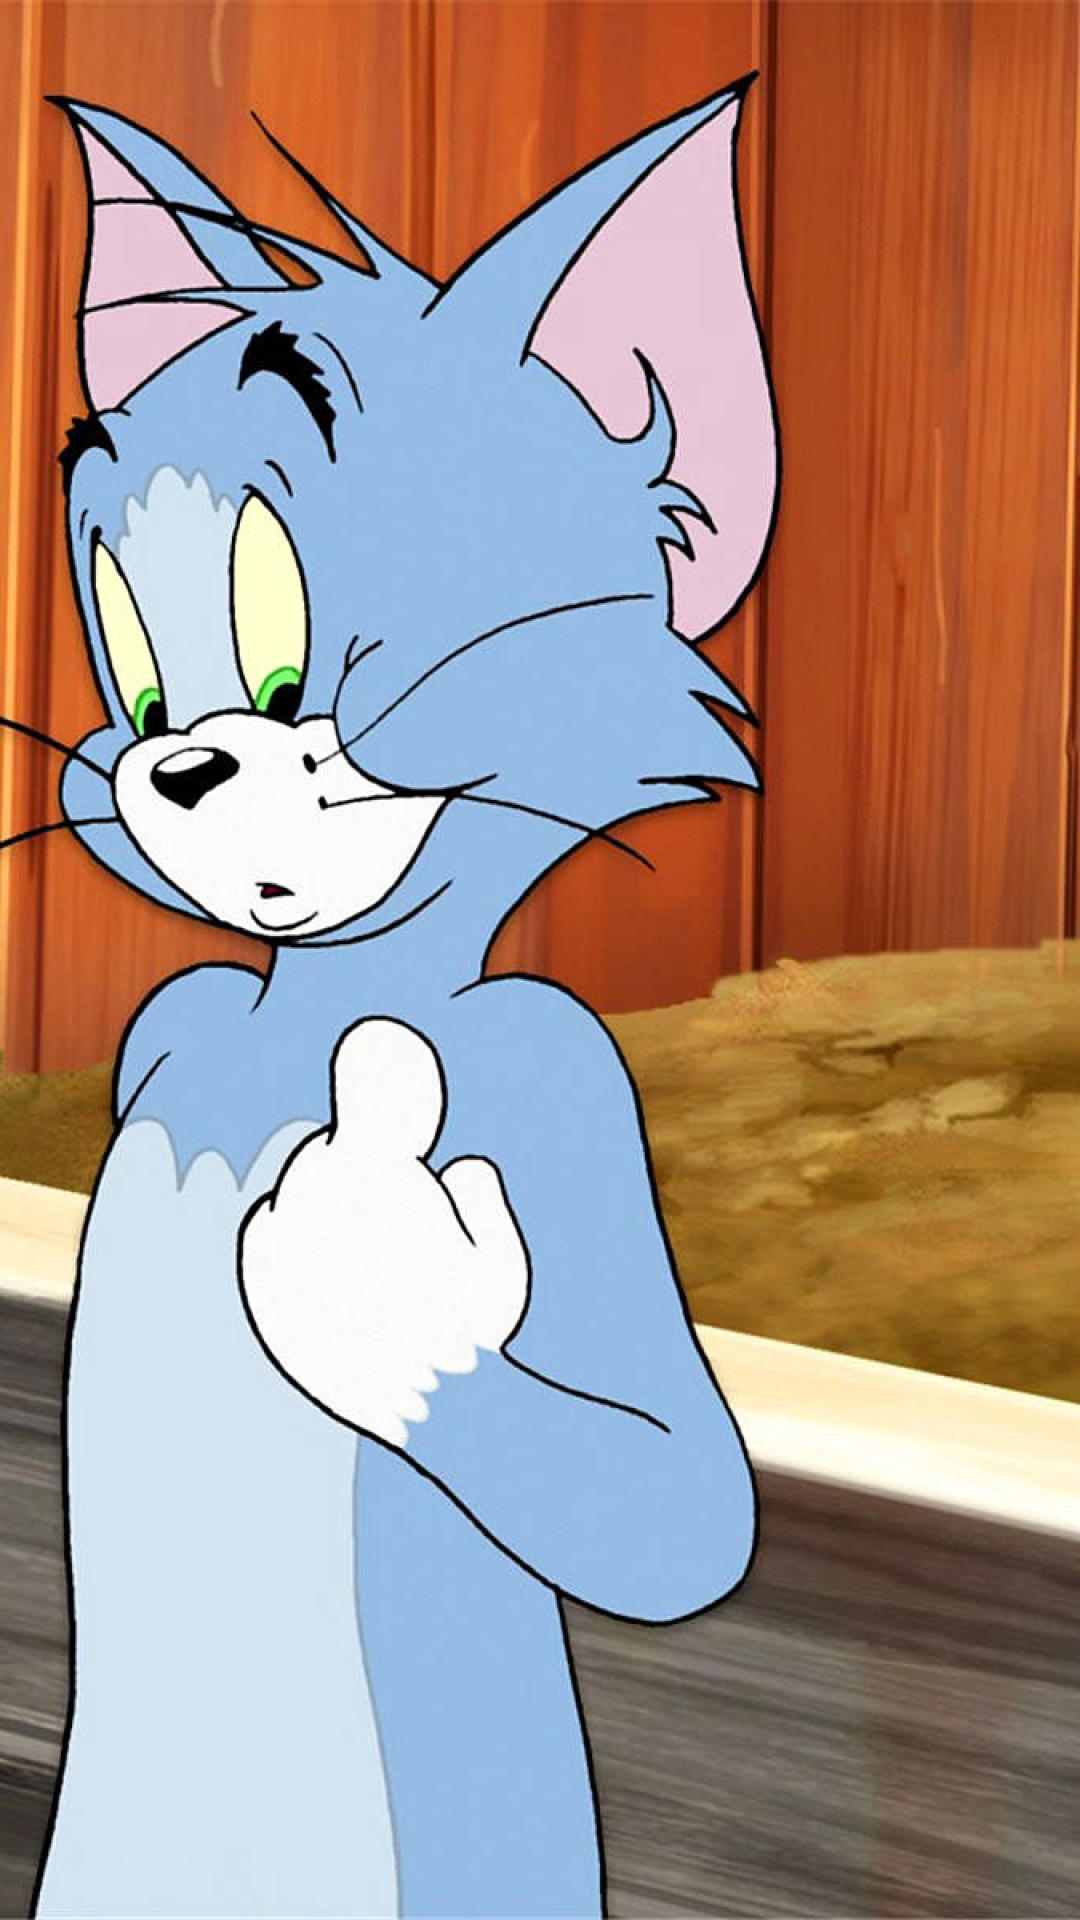 Tom and Jerry, Land of Witches screenshot #1 1080x1920